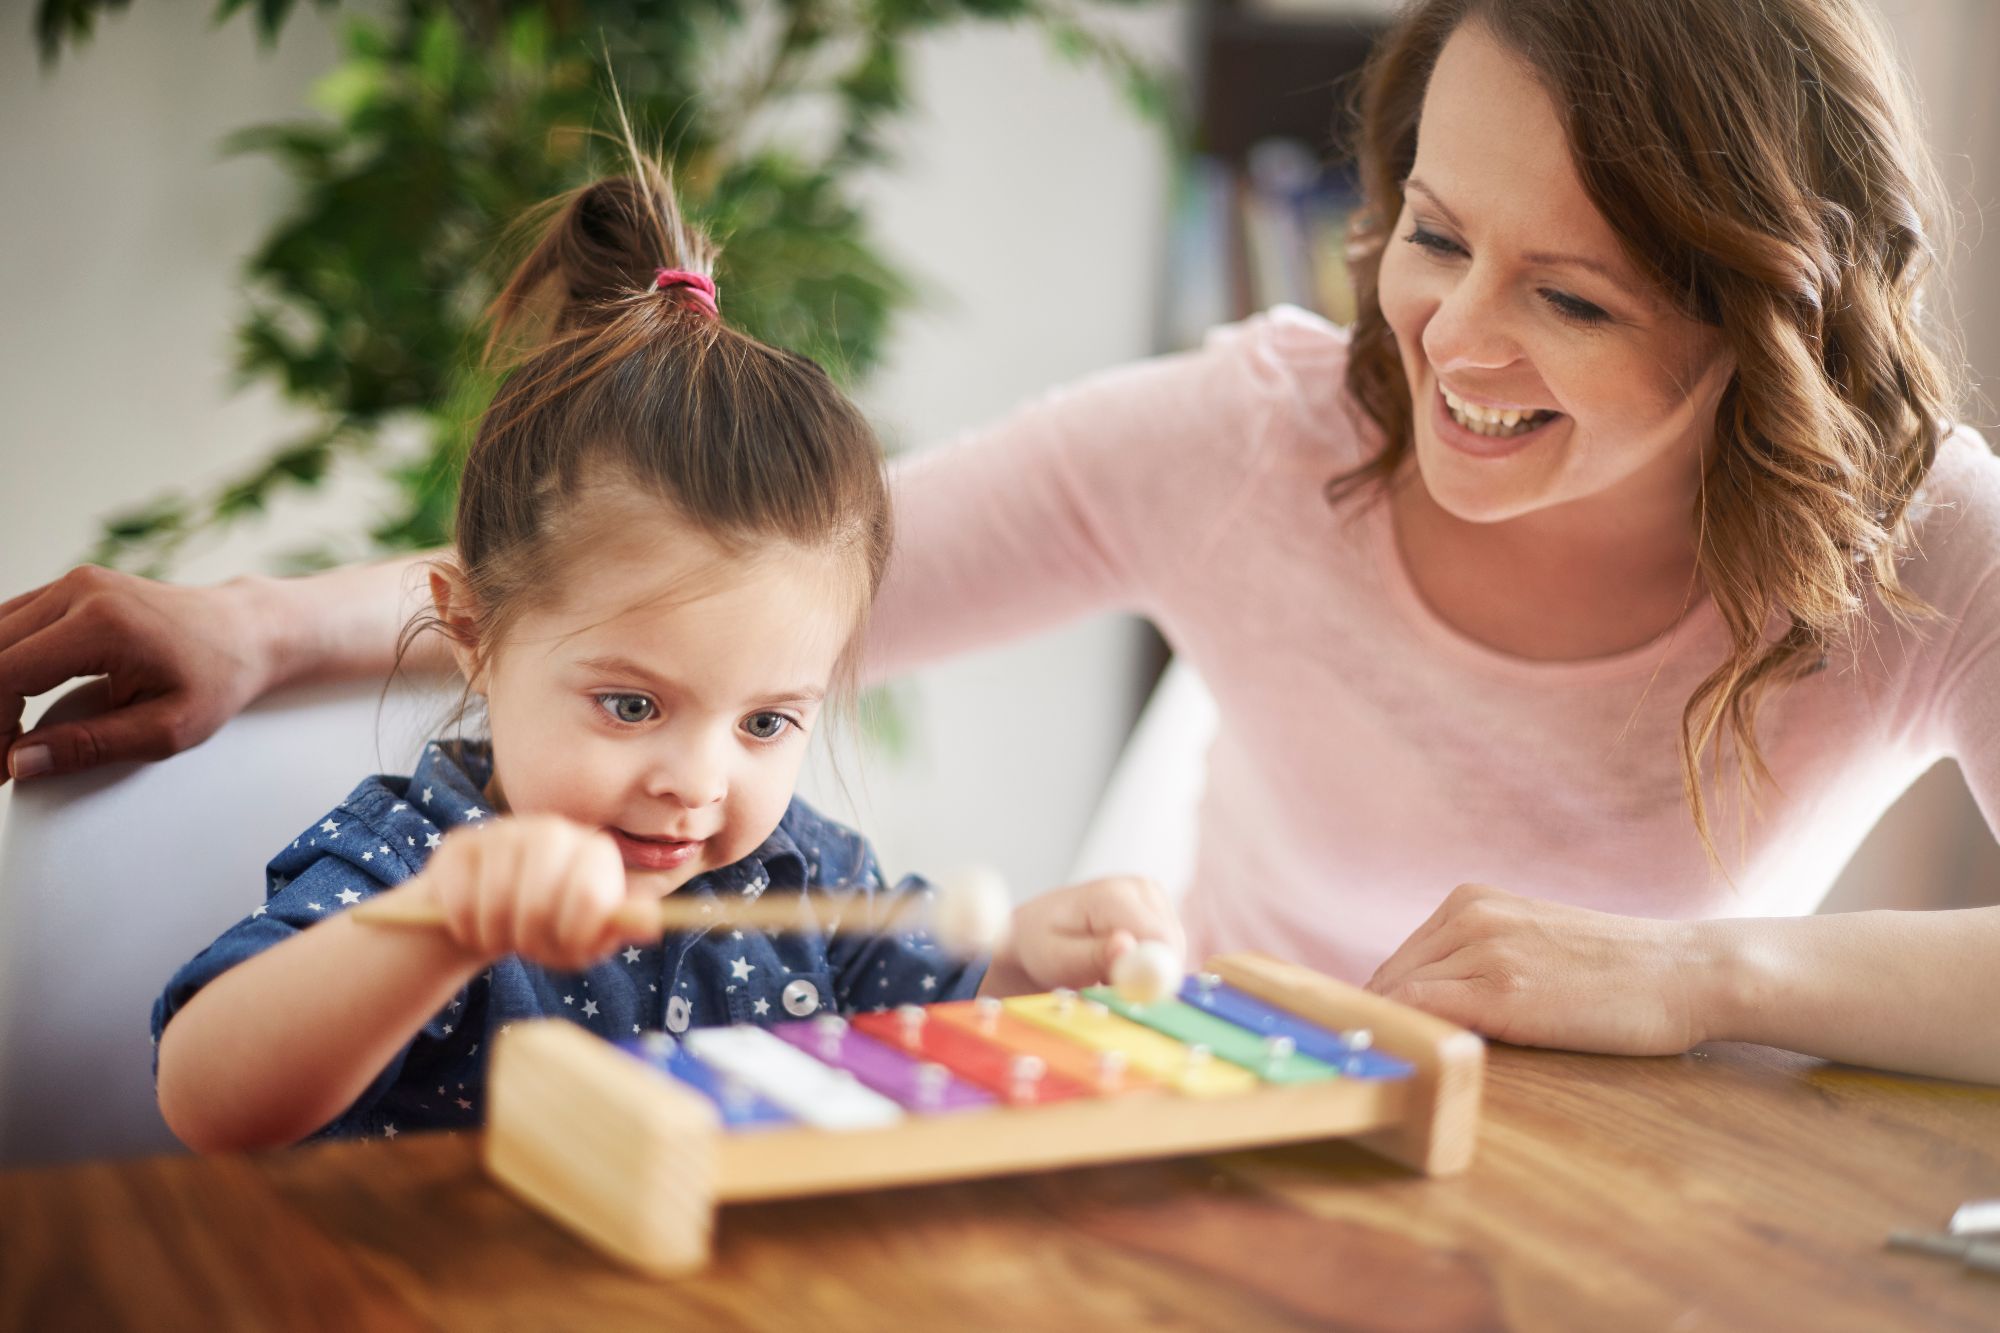 A little girl plays a toy glockenspiel while her mother watches, smiling